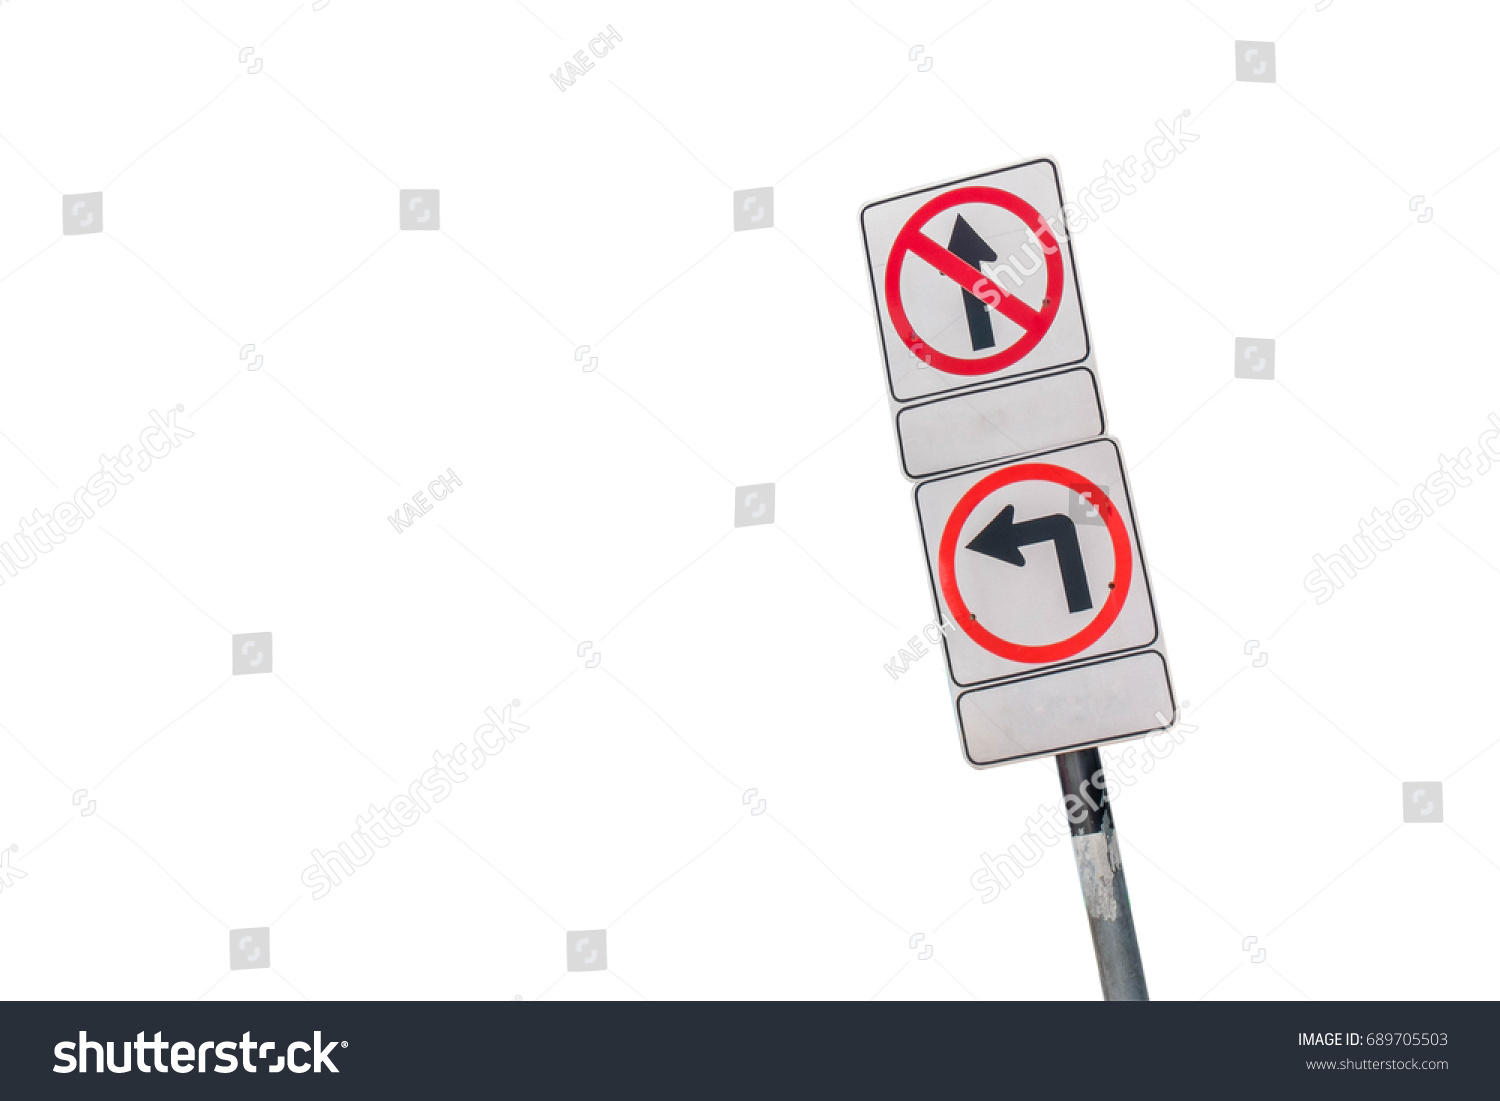 Traffic sign isolated from white background. #689705503